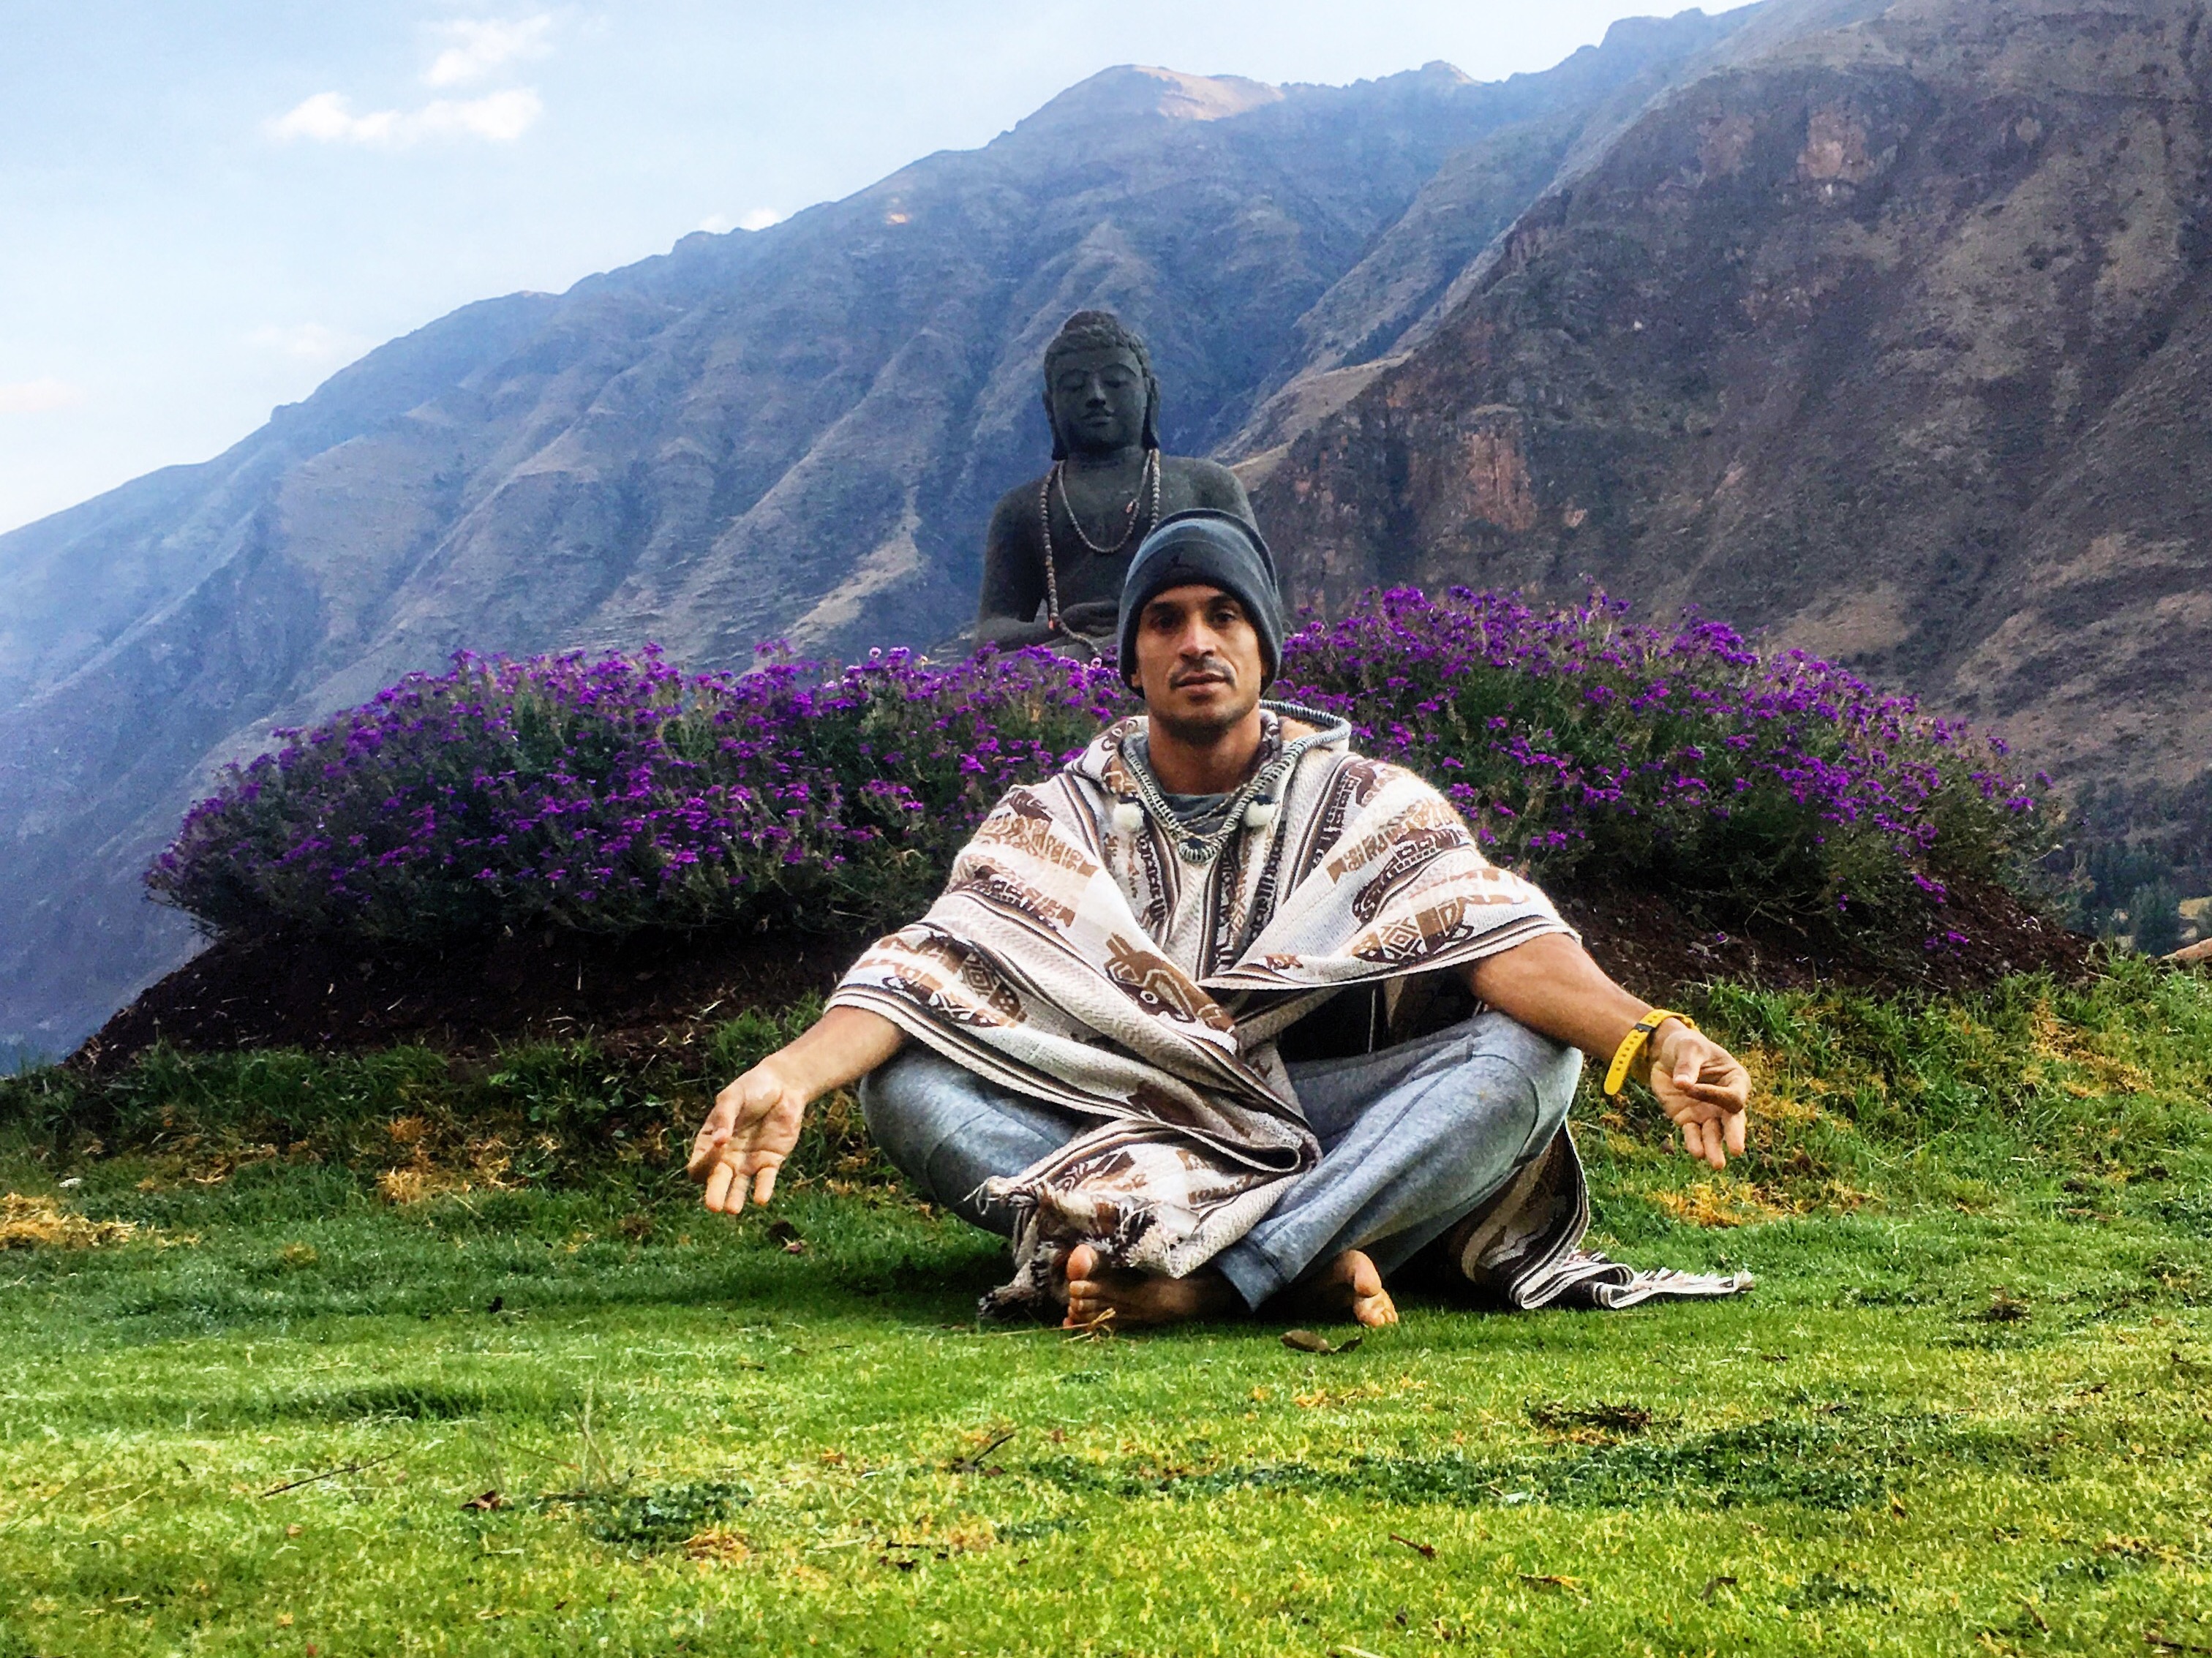 Branden Collinsworth at the Ashram Temple in the sacred Valley of Peru.